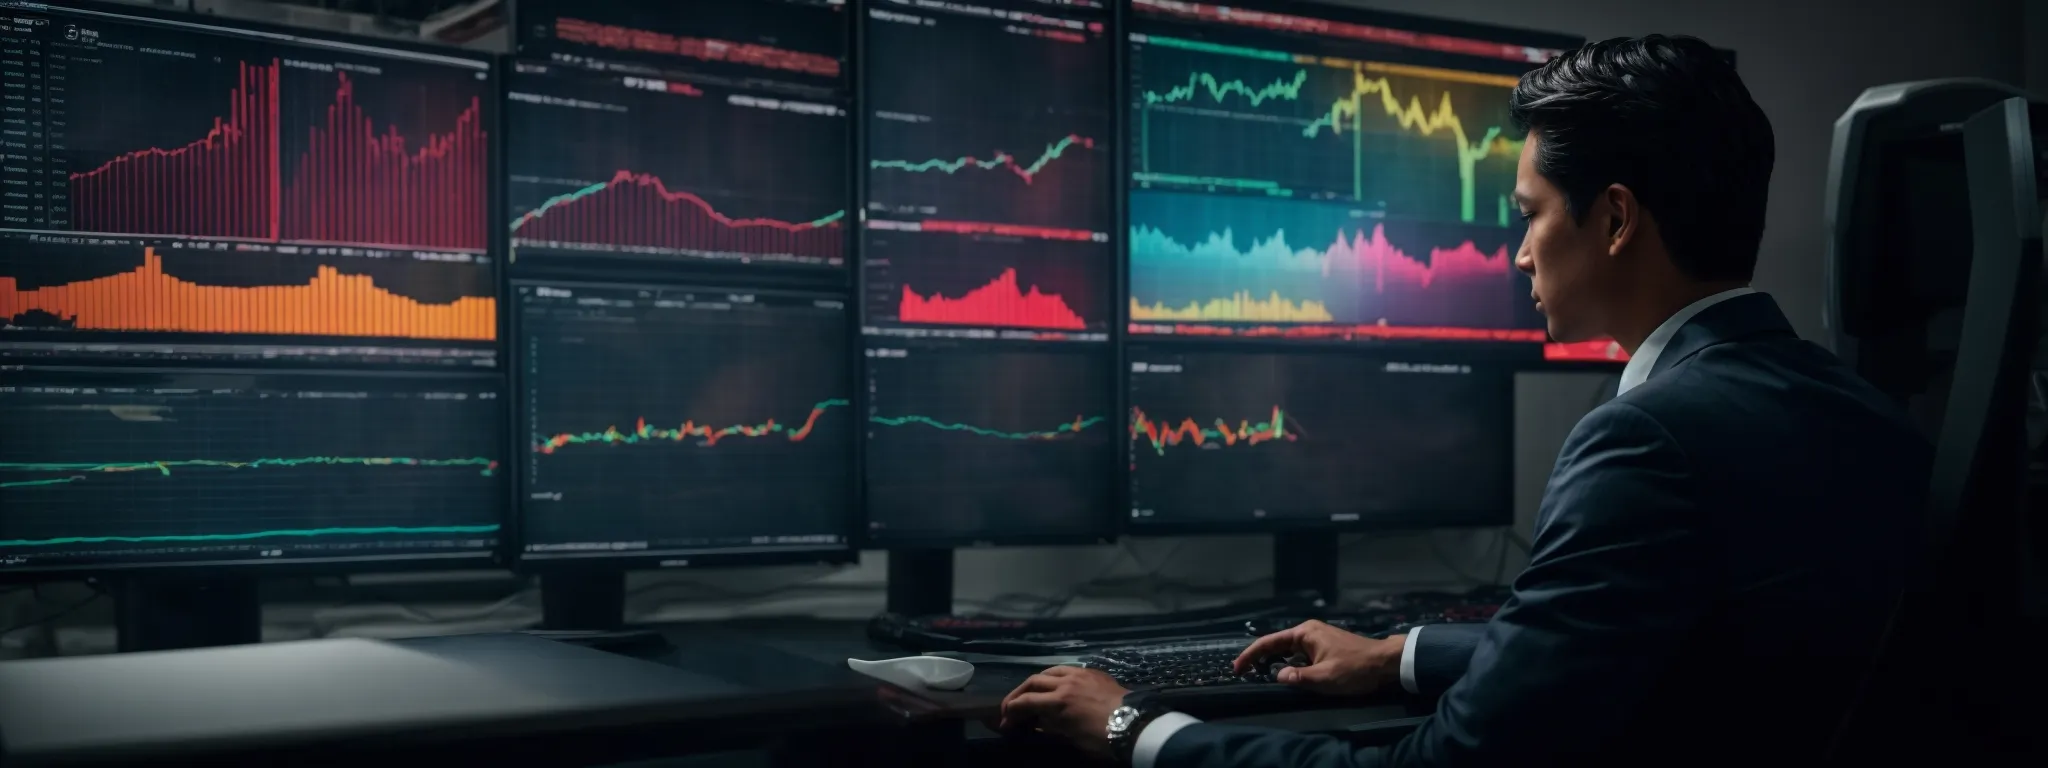 a person seated before a large monitor displaying colorful analytics and data graphs, deeply focused on market trends.